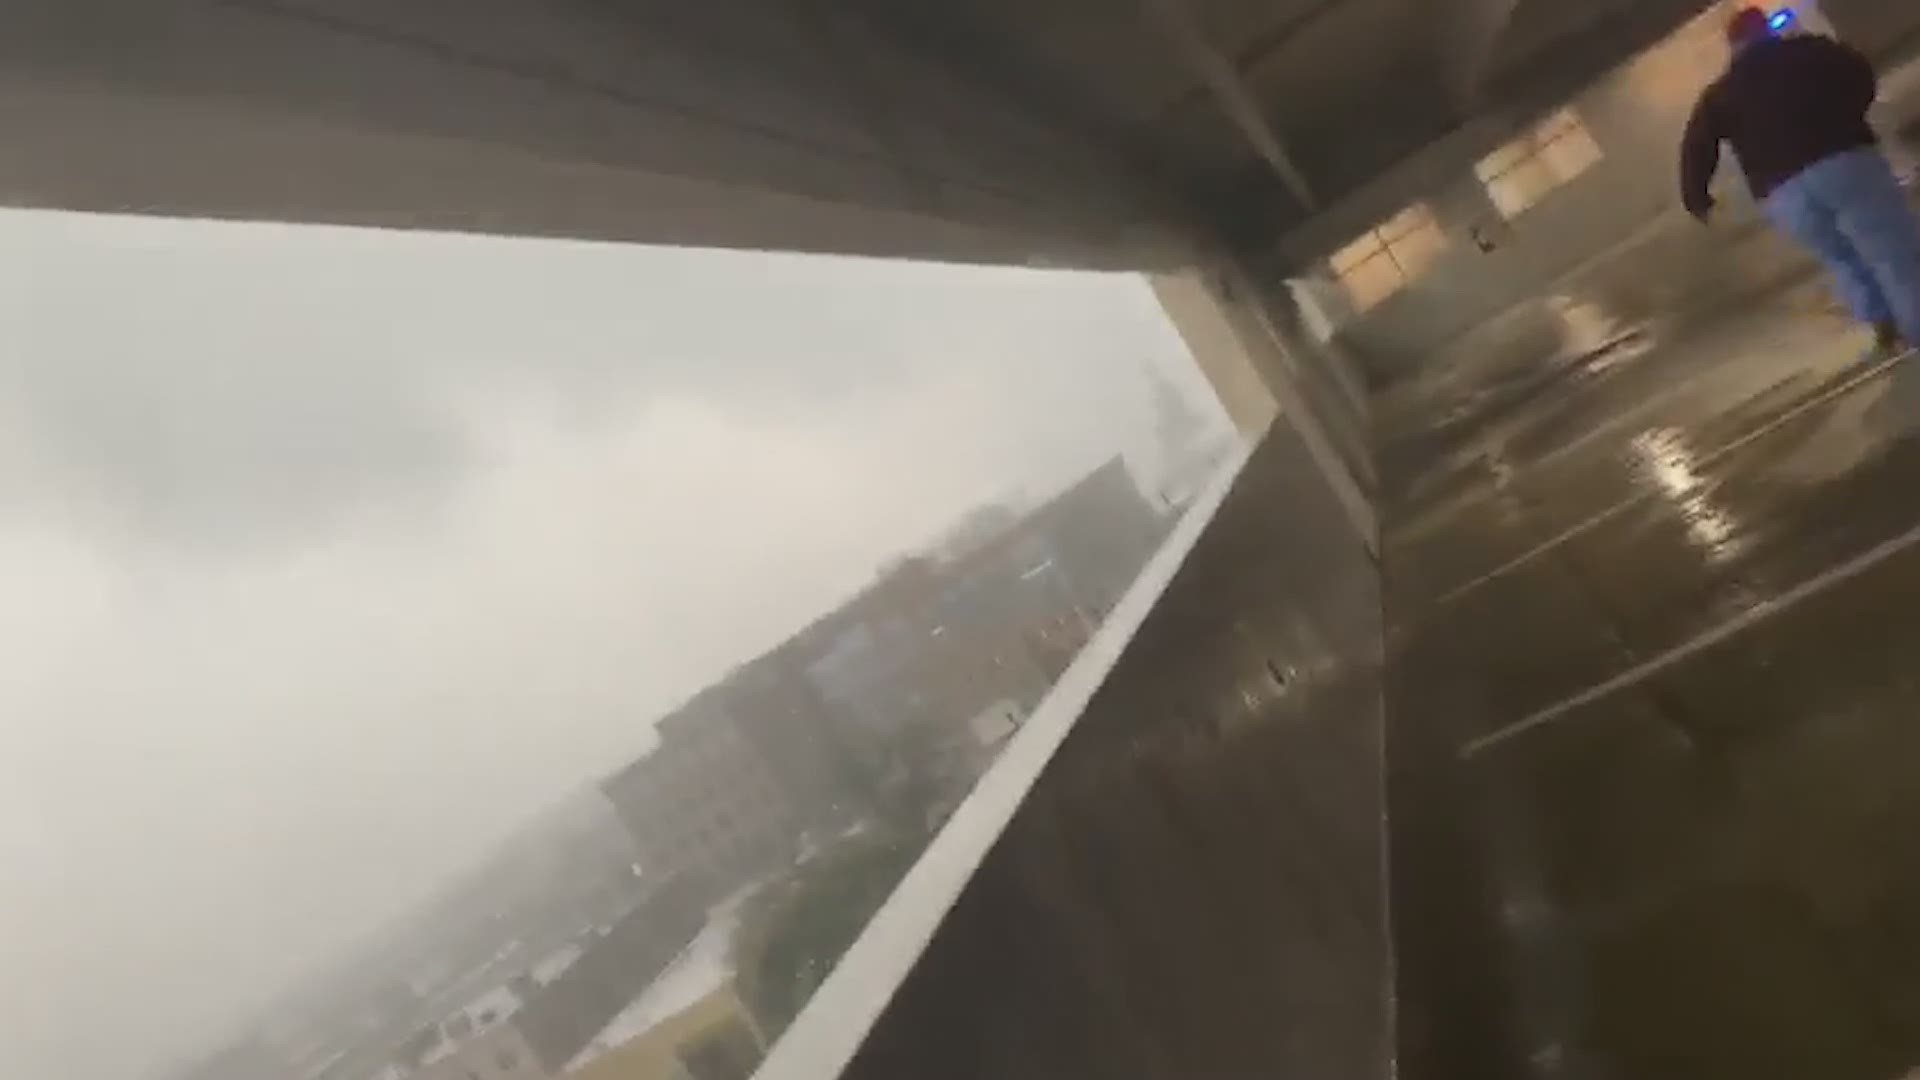 Joshua White was able to capture the video from a downtown Macon parking garage.